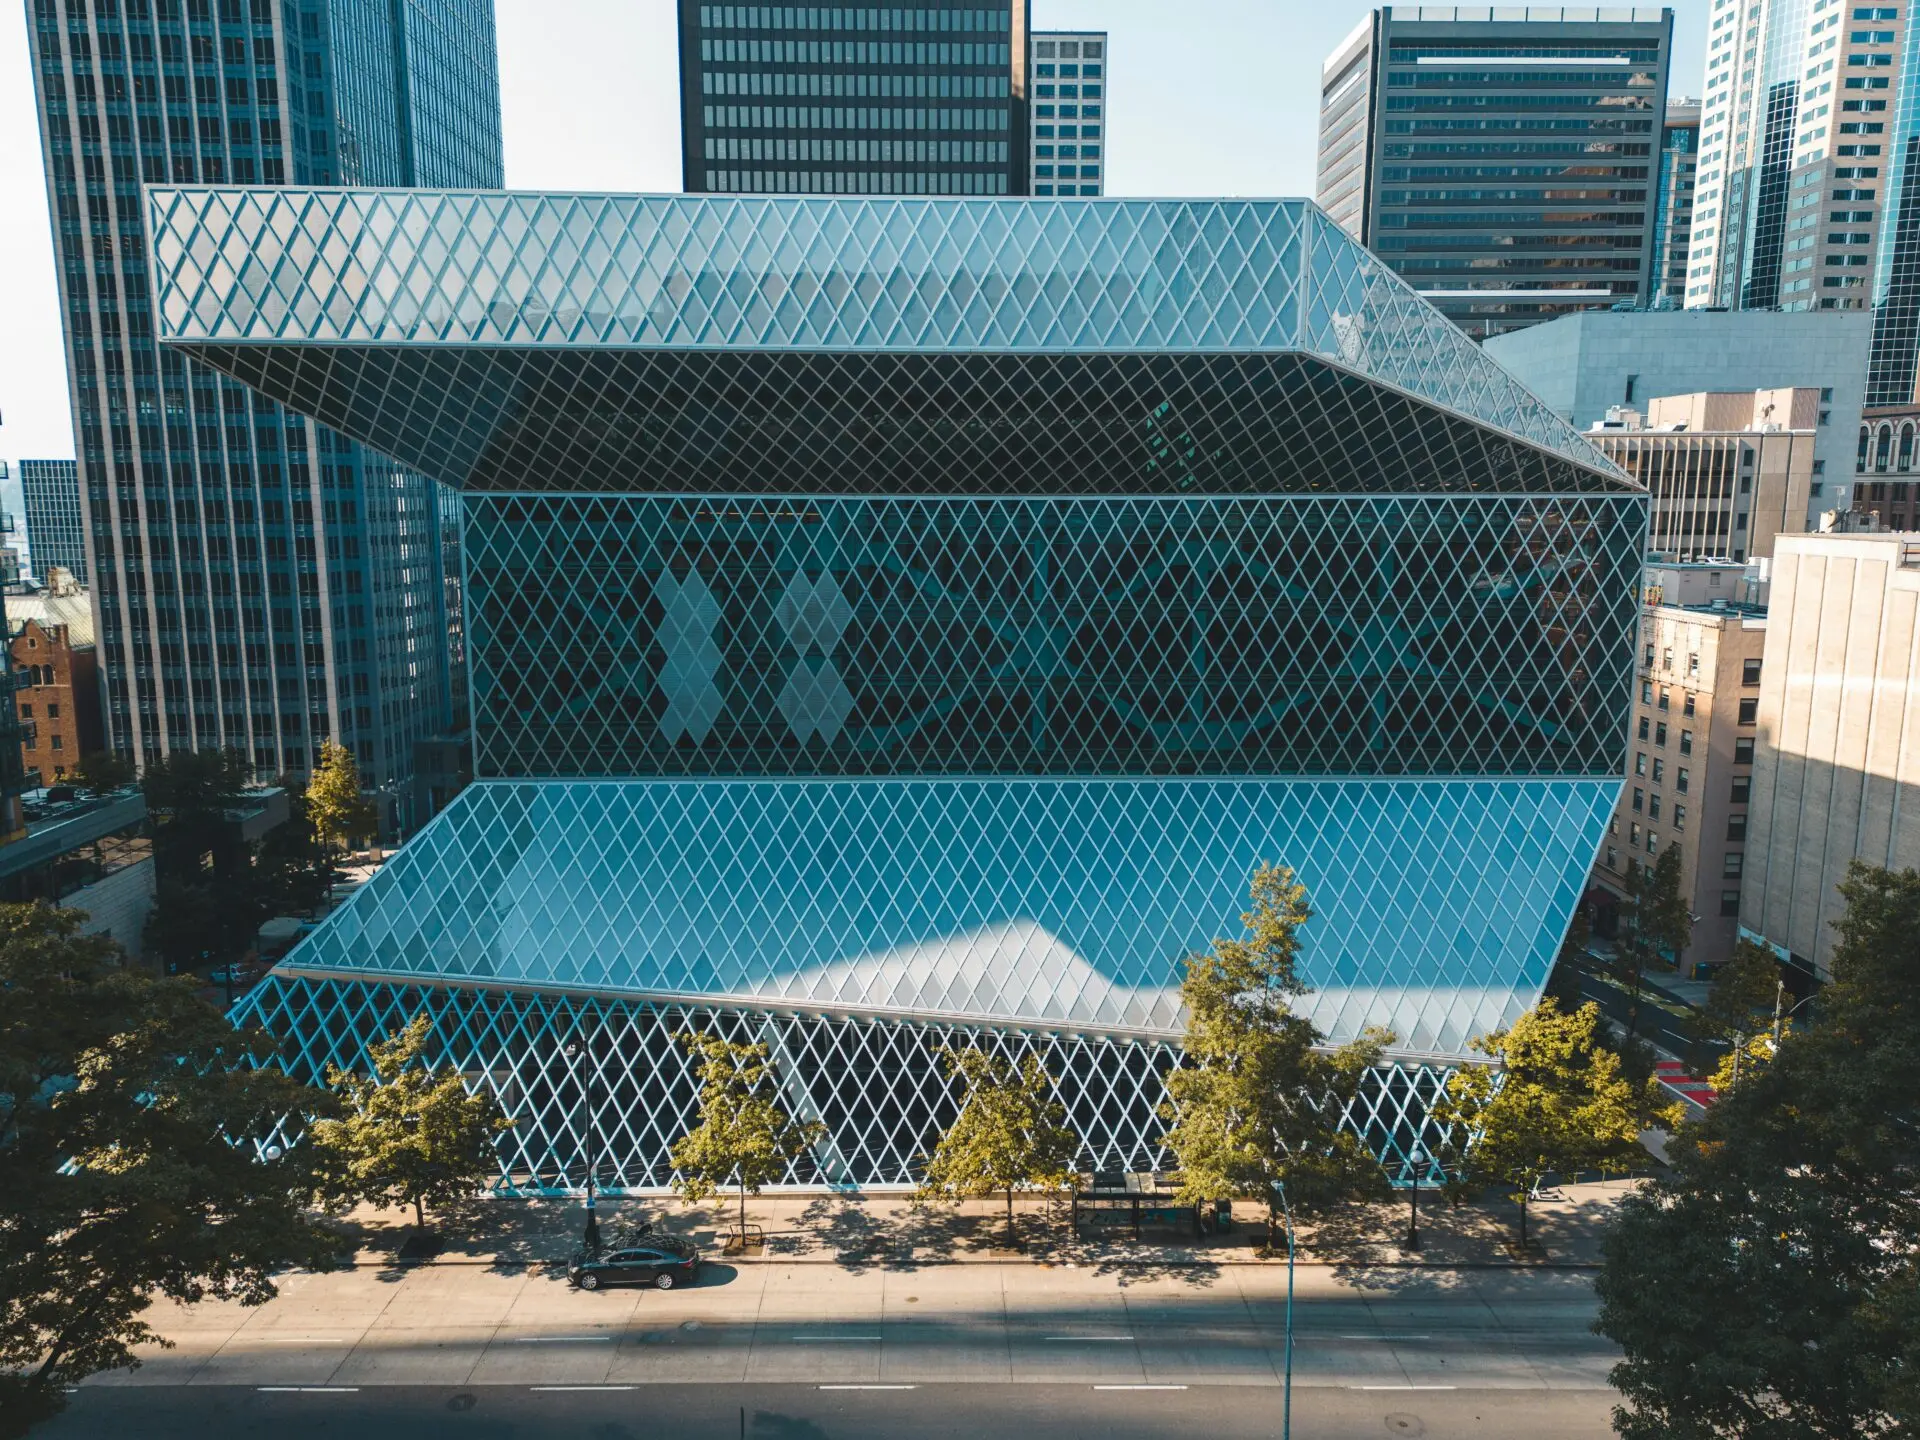 Seattle Central Library in downtown Seattle, Washington